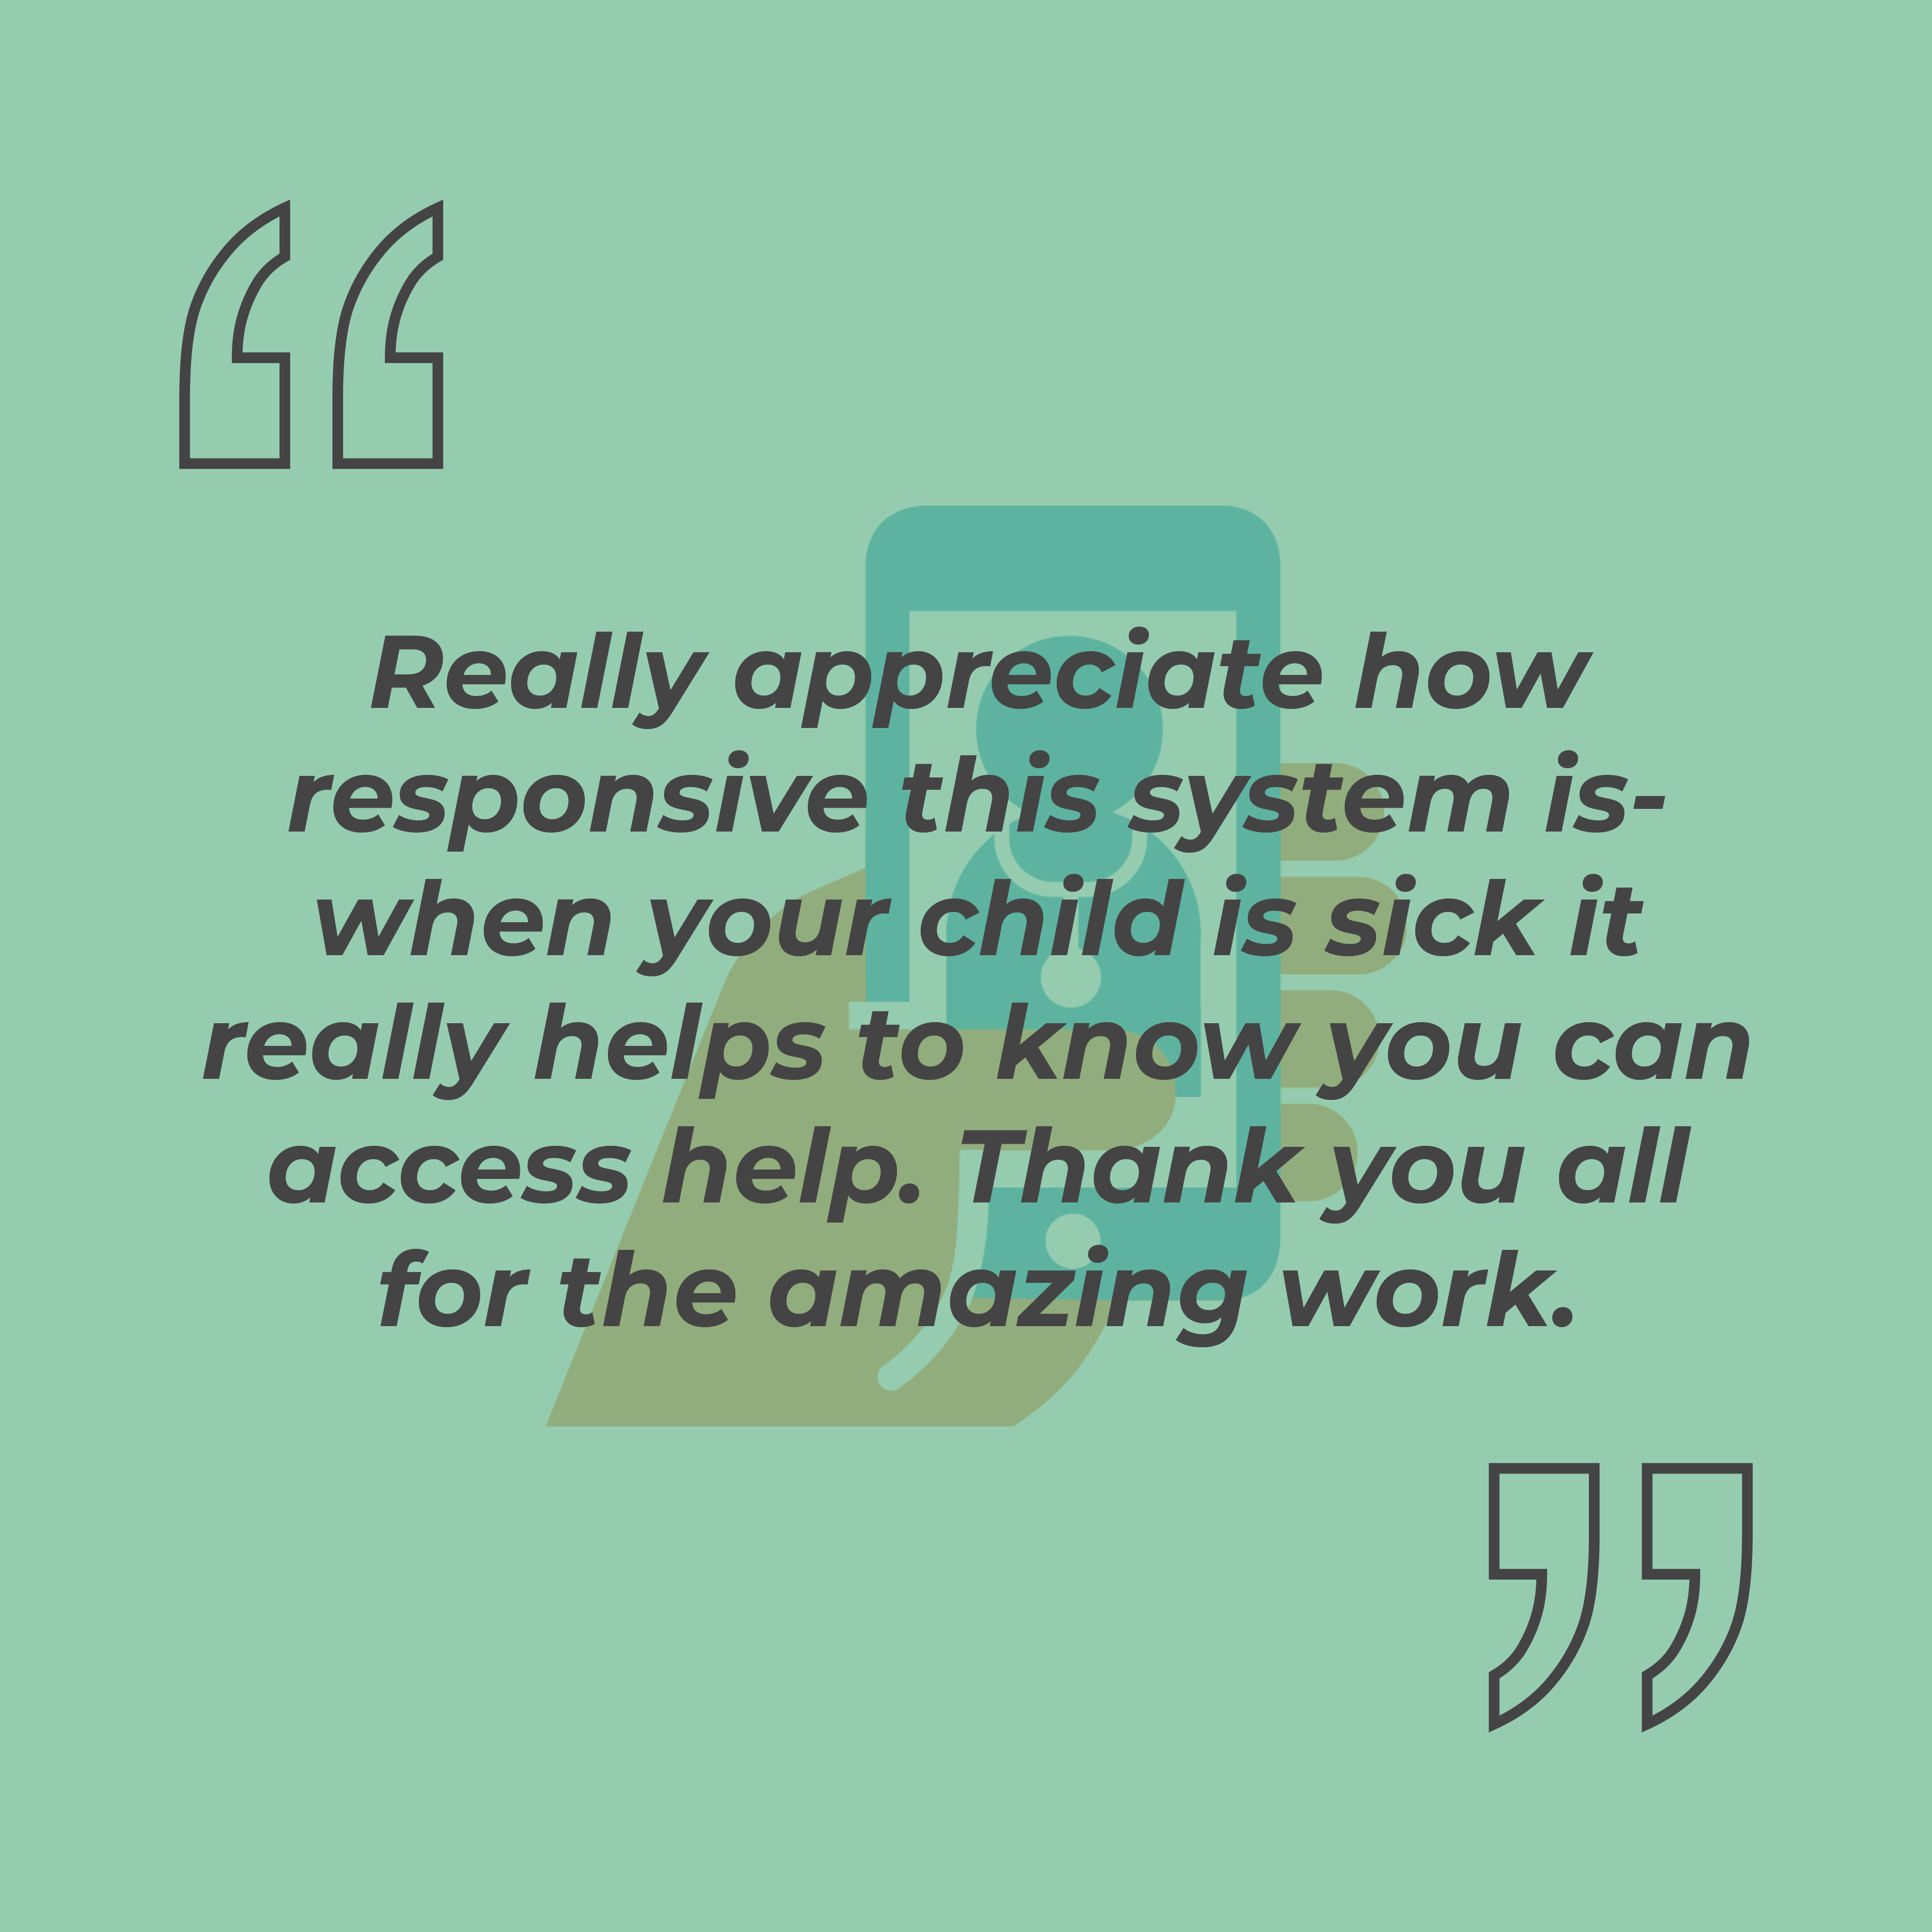 Really appreciate how responsive this system is-when your child is sick it really helps to know you can access help. Thank you all for the amazing work